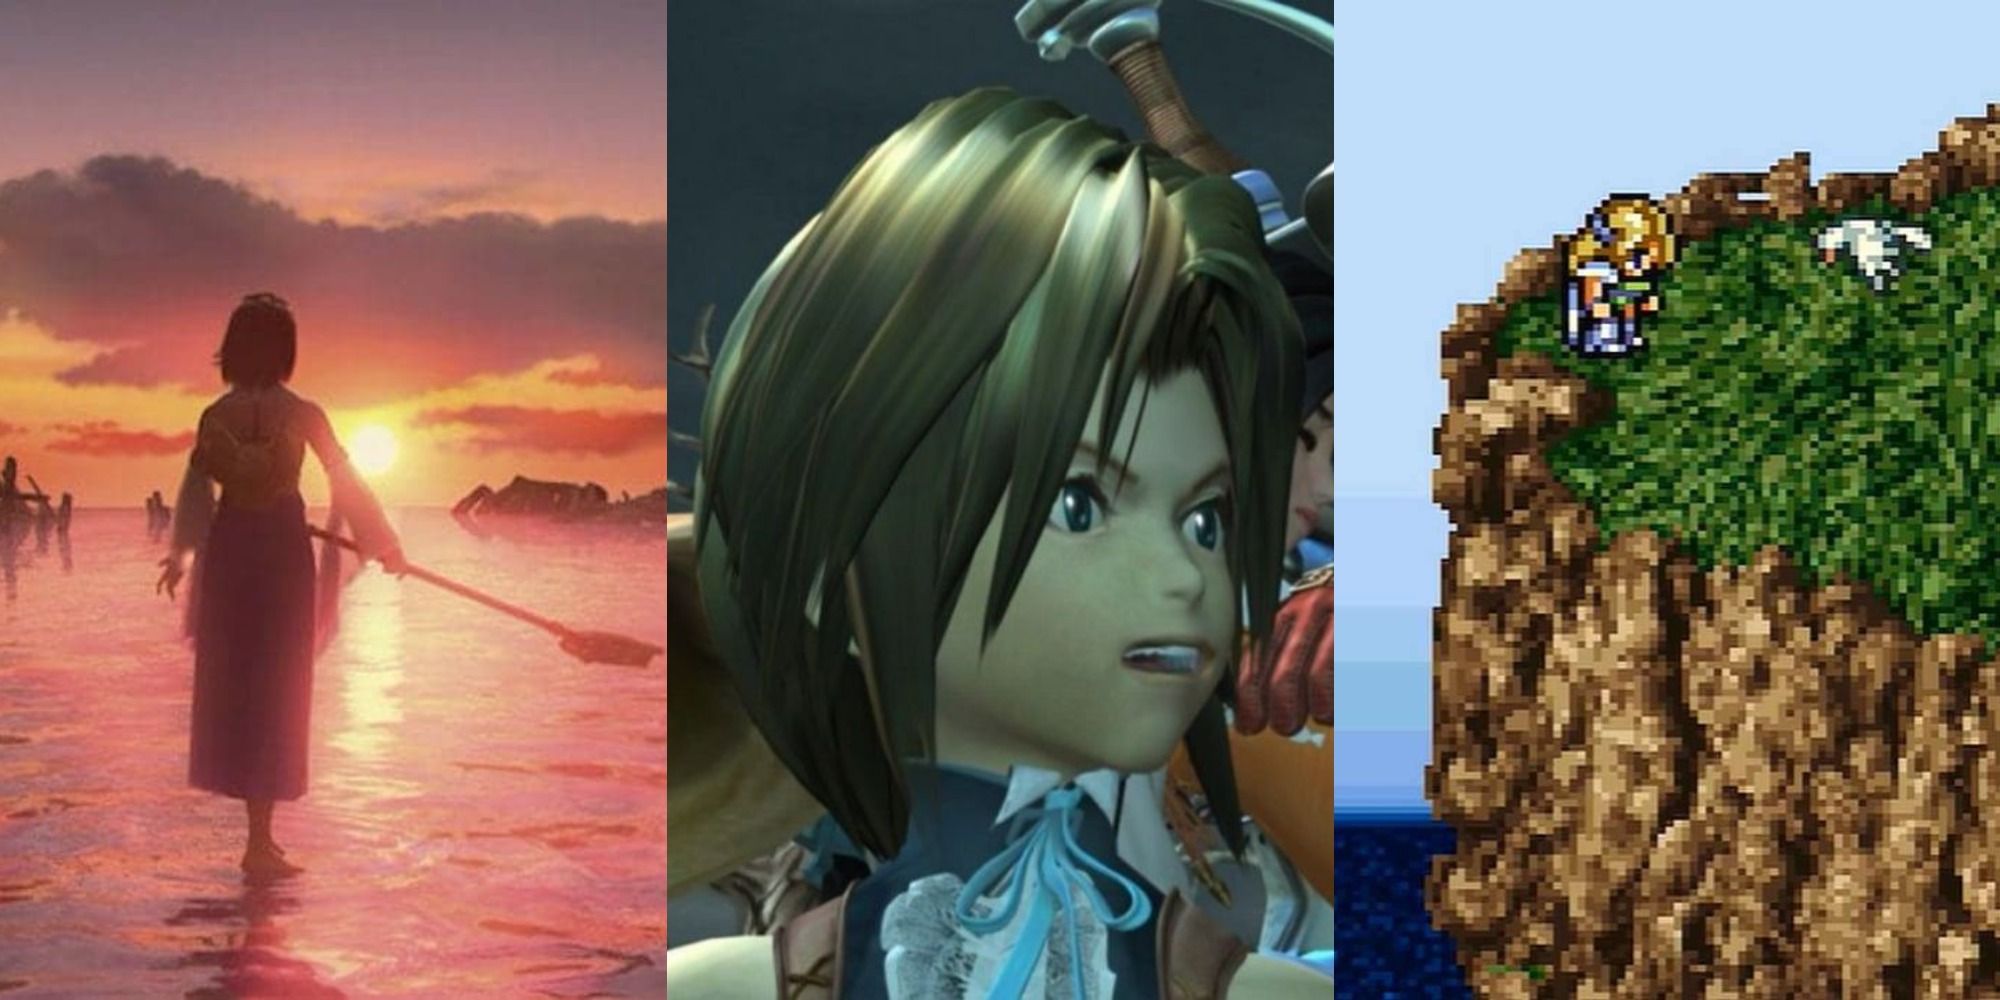 Three images side by side of scenes from Final Fantasy X, IX, and VI